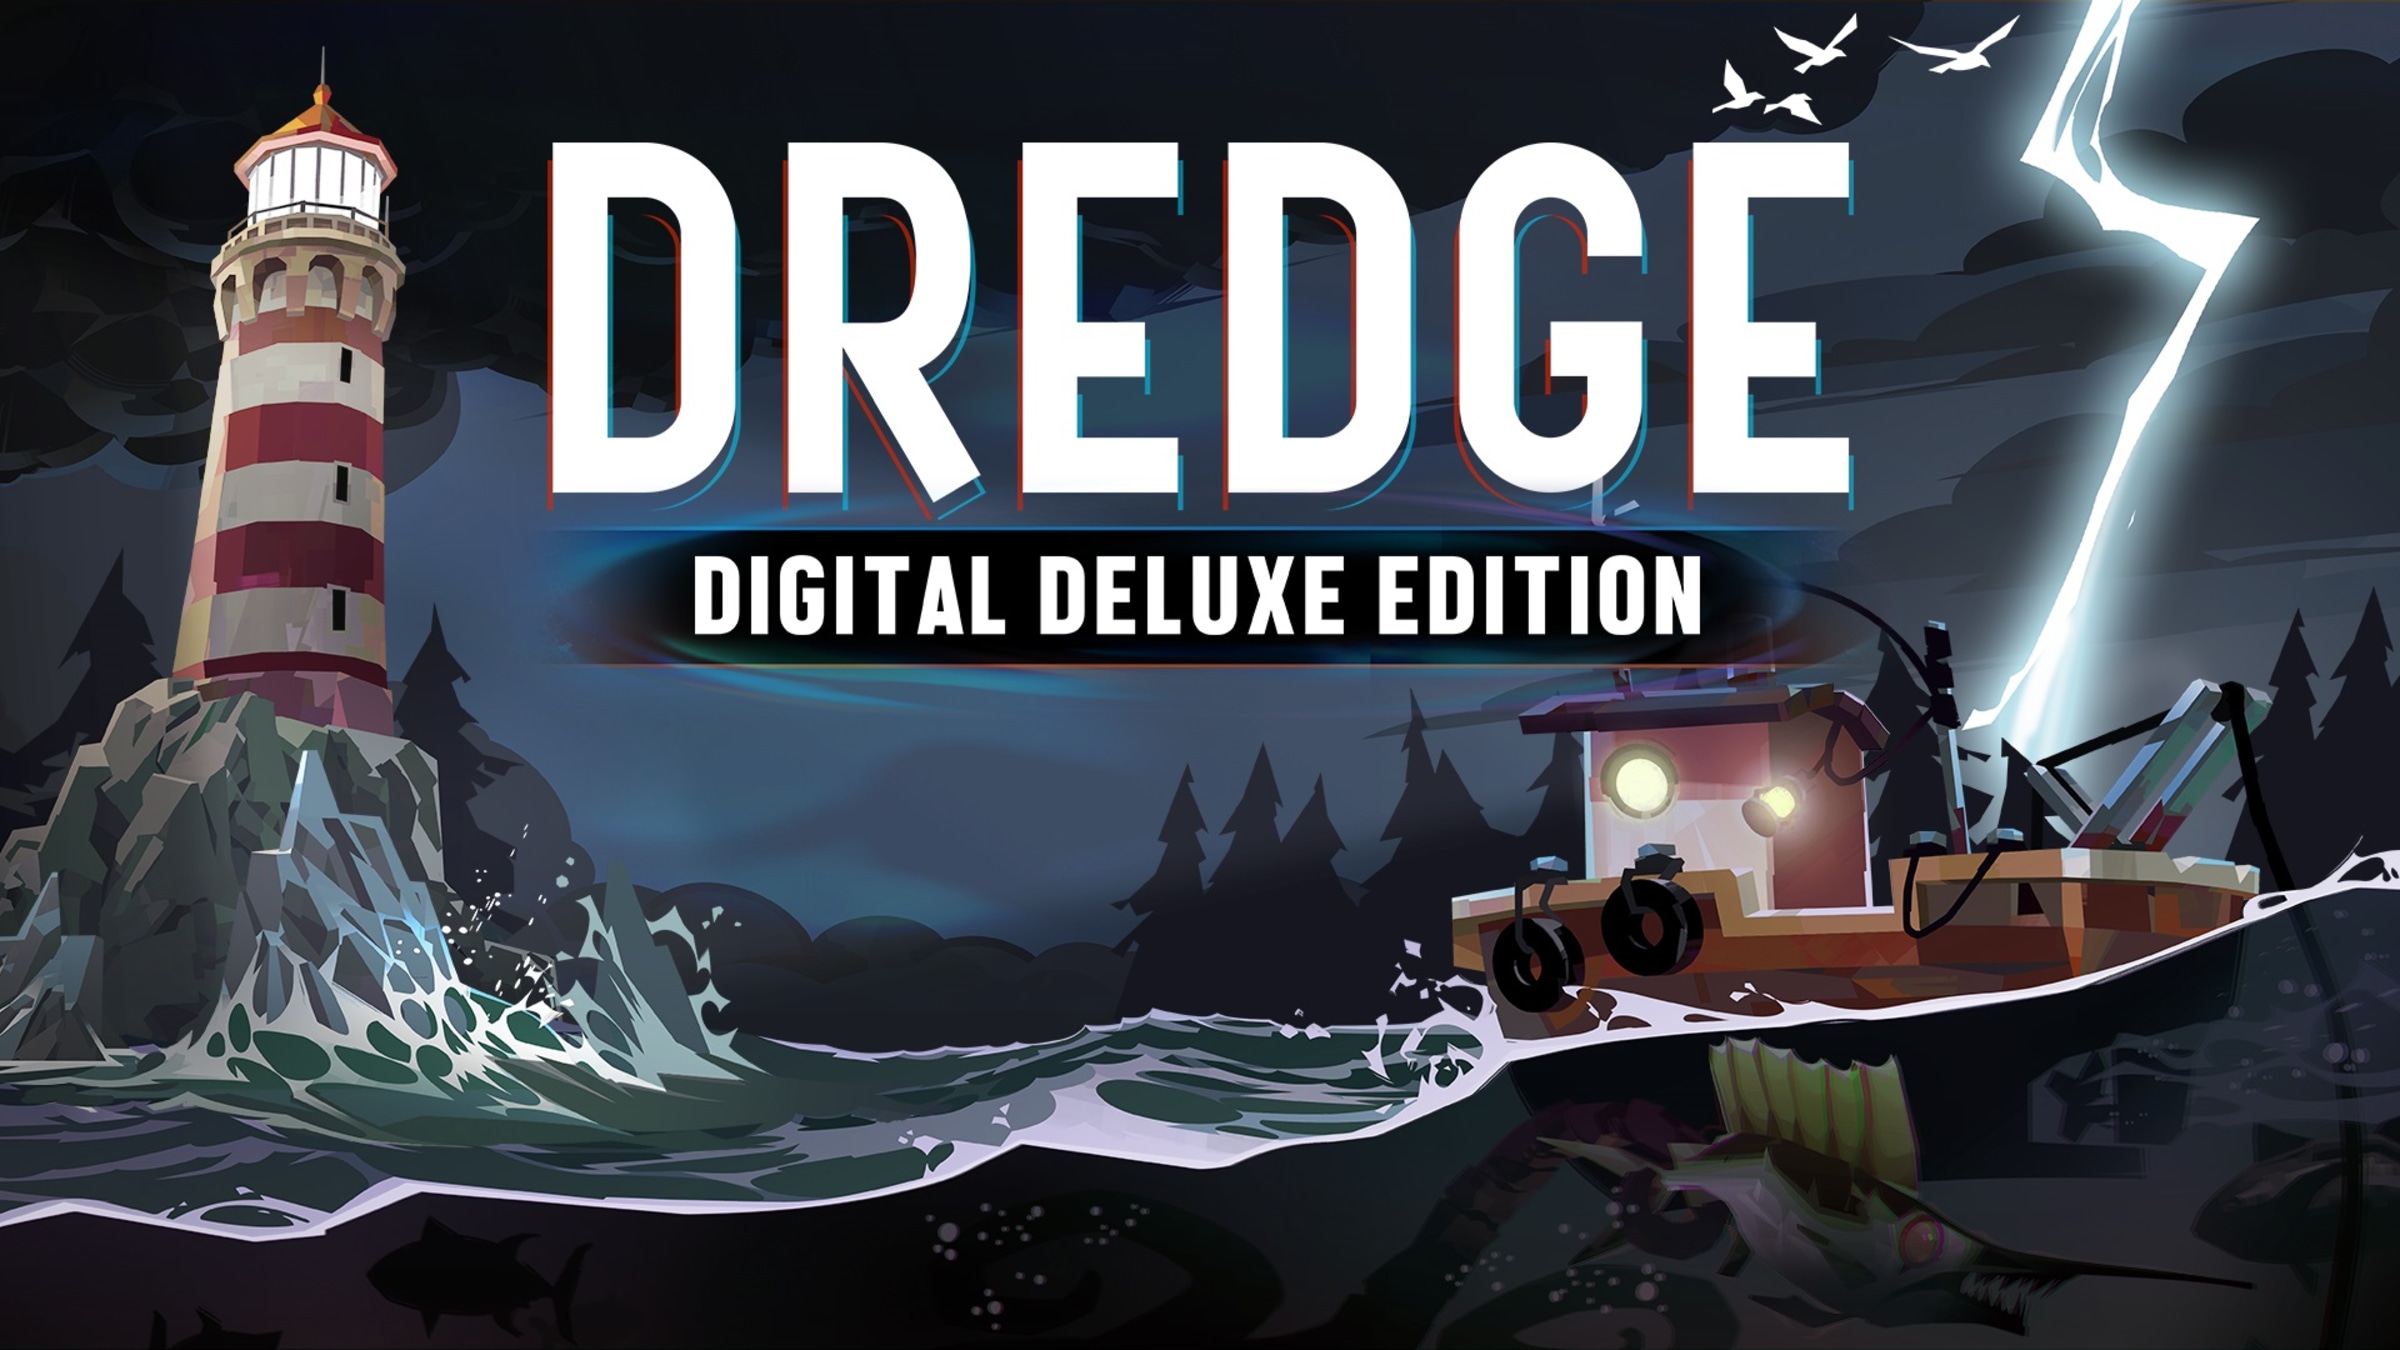 Dredge - Deluxe Edition Unboxing (SW) 